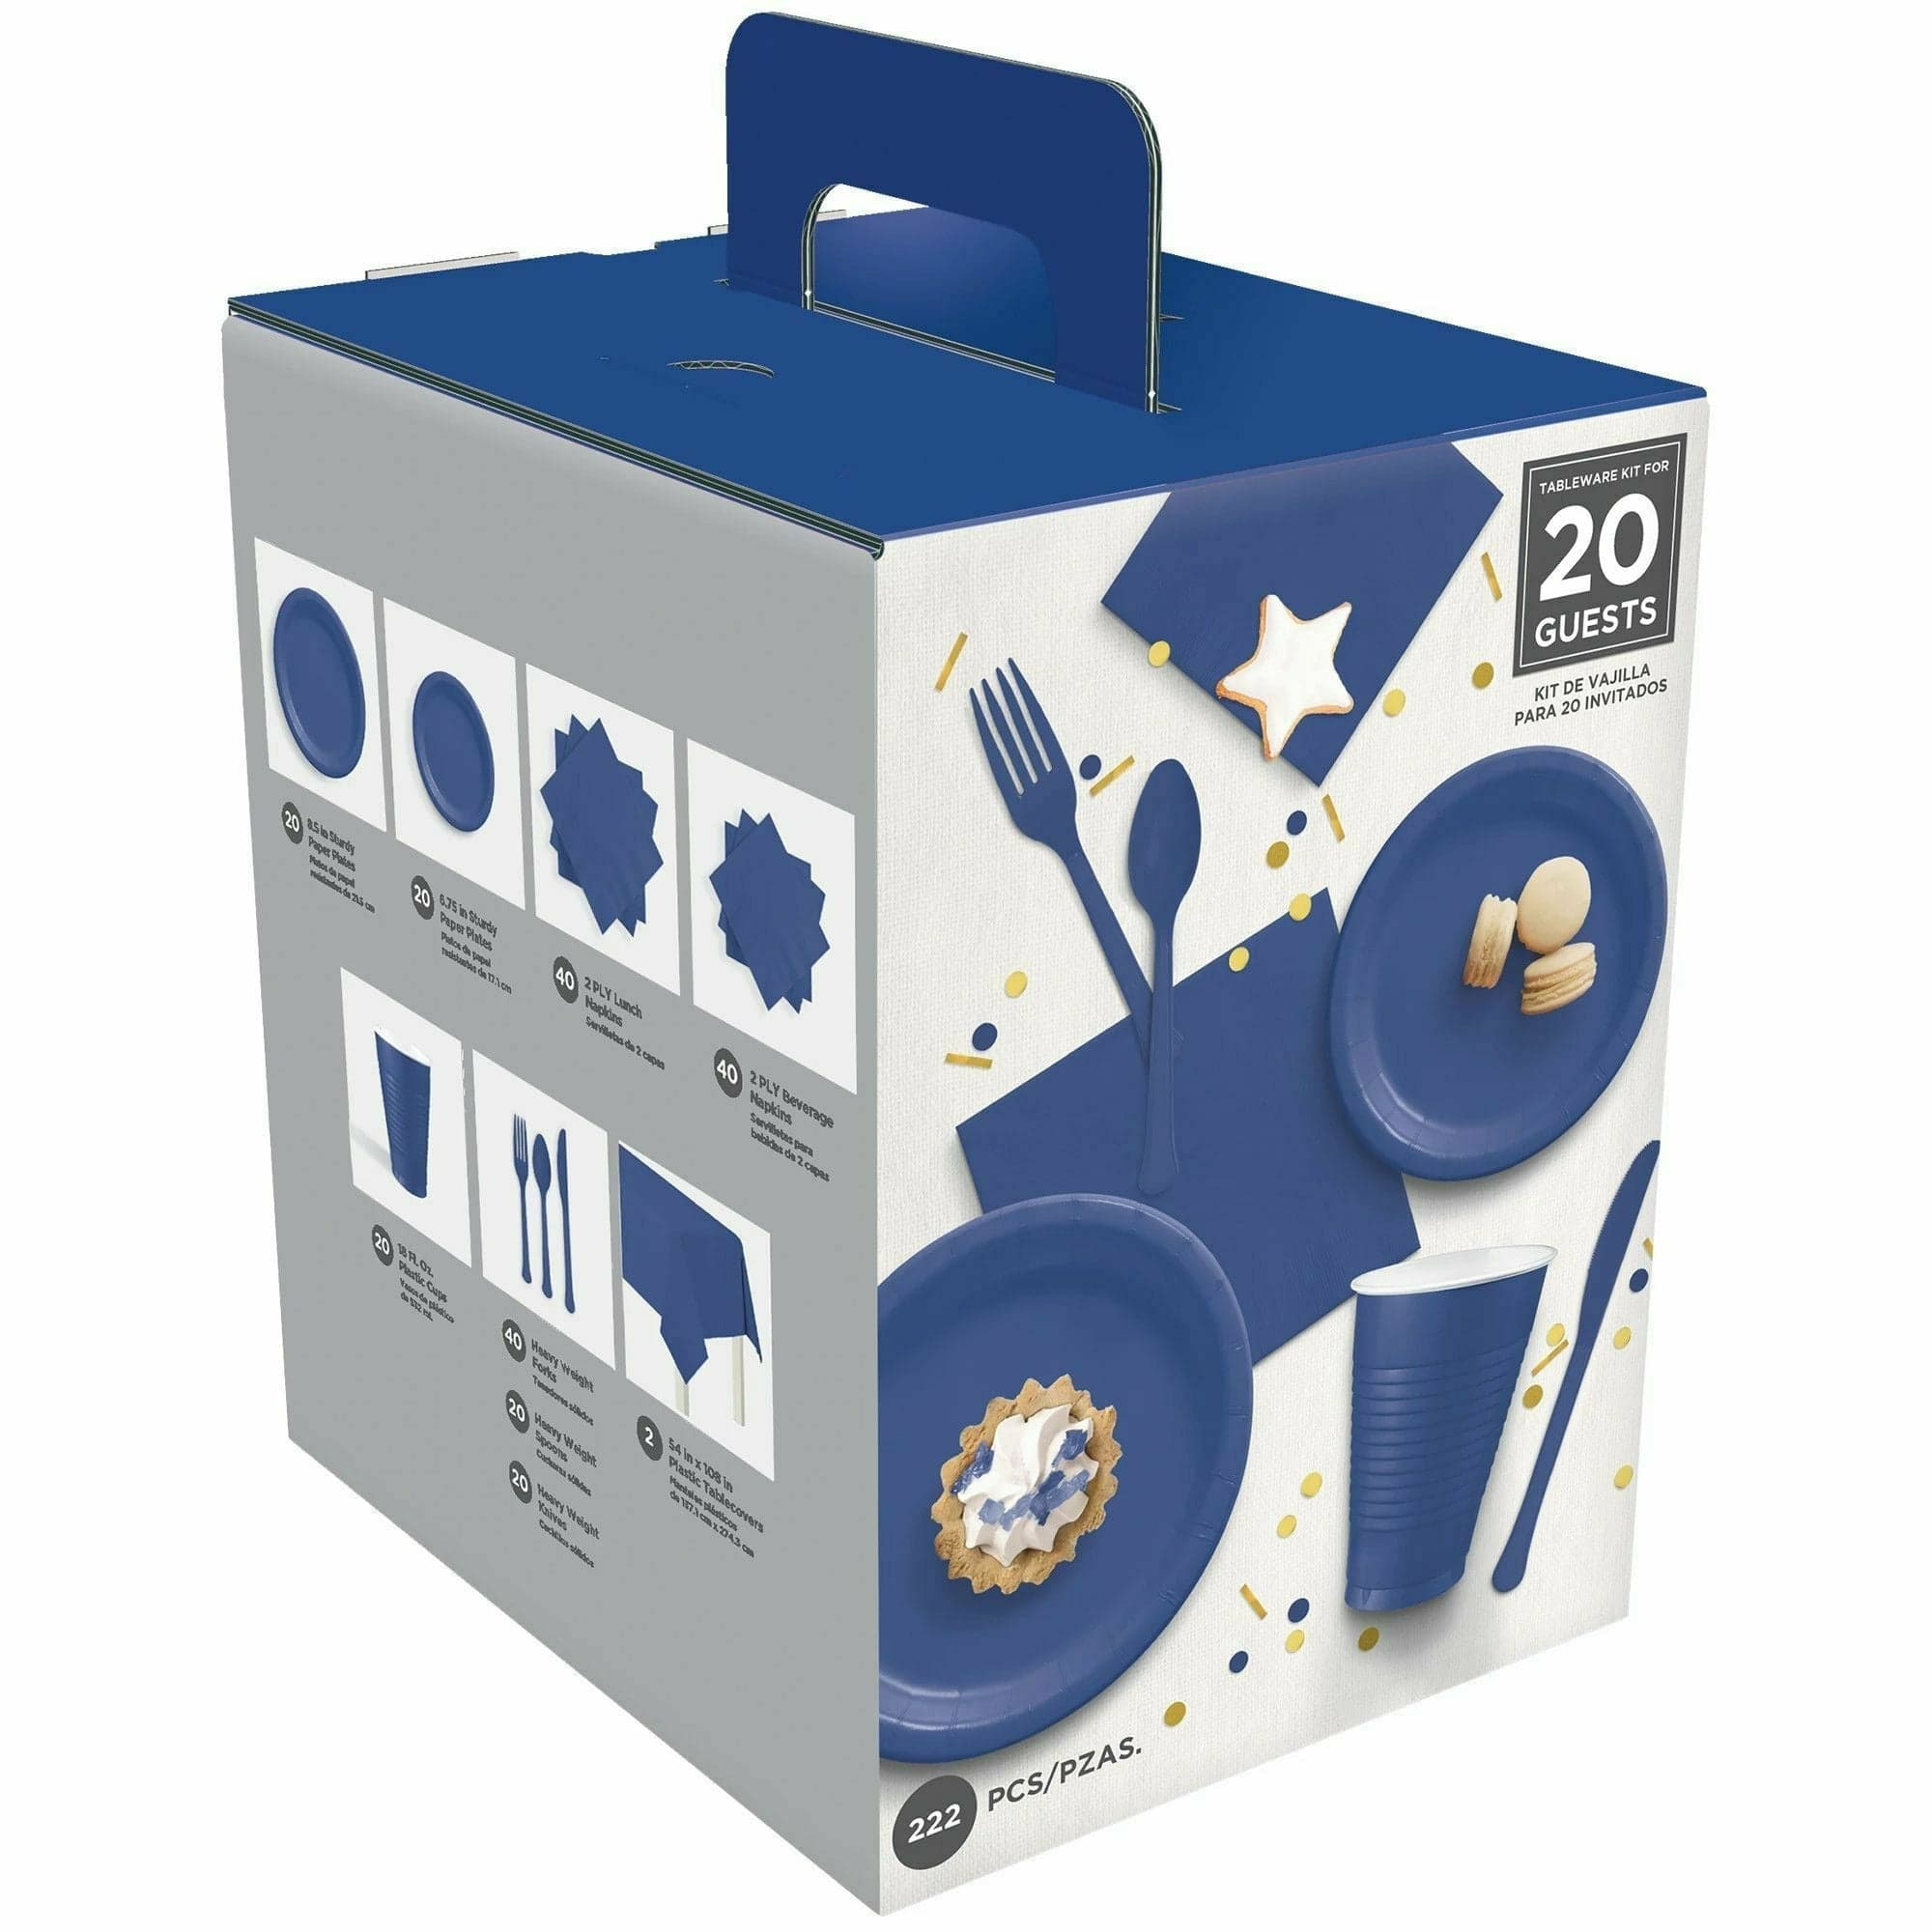 Amscan BASIC Bright Royal Blue - Tableware Kit for 20 Guests